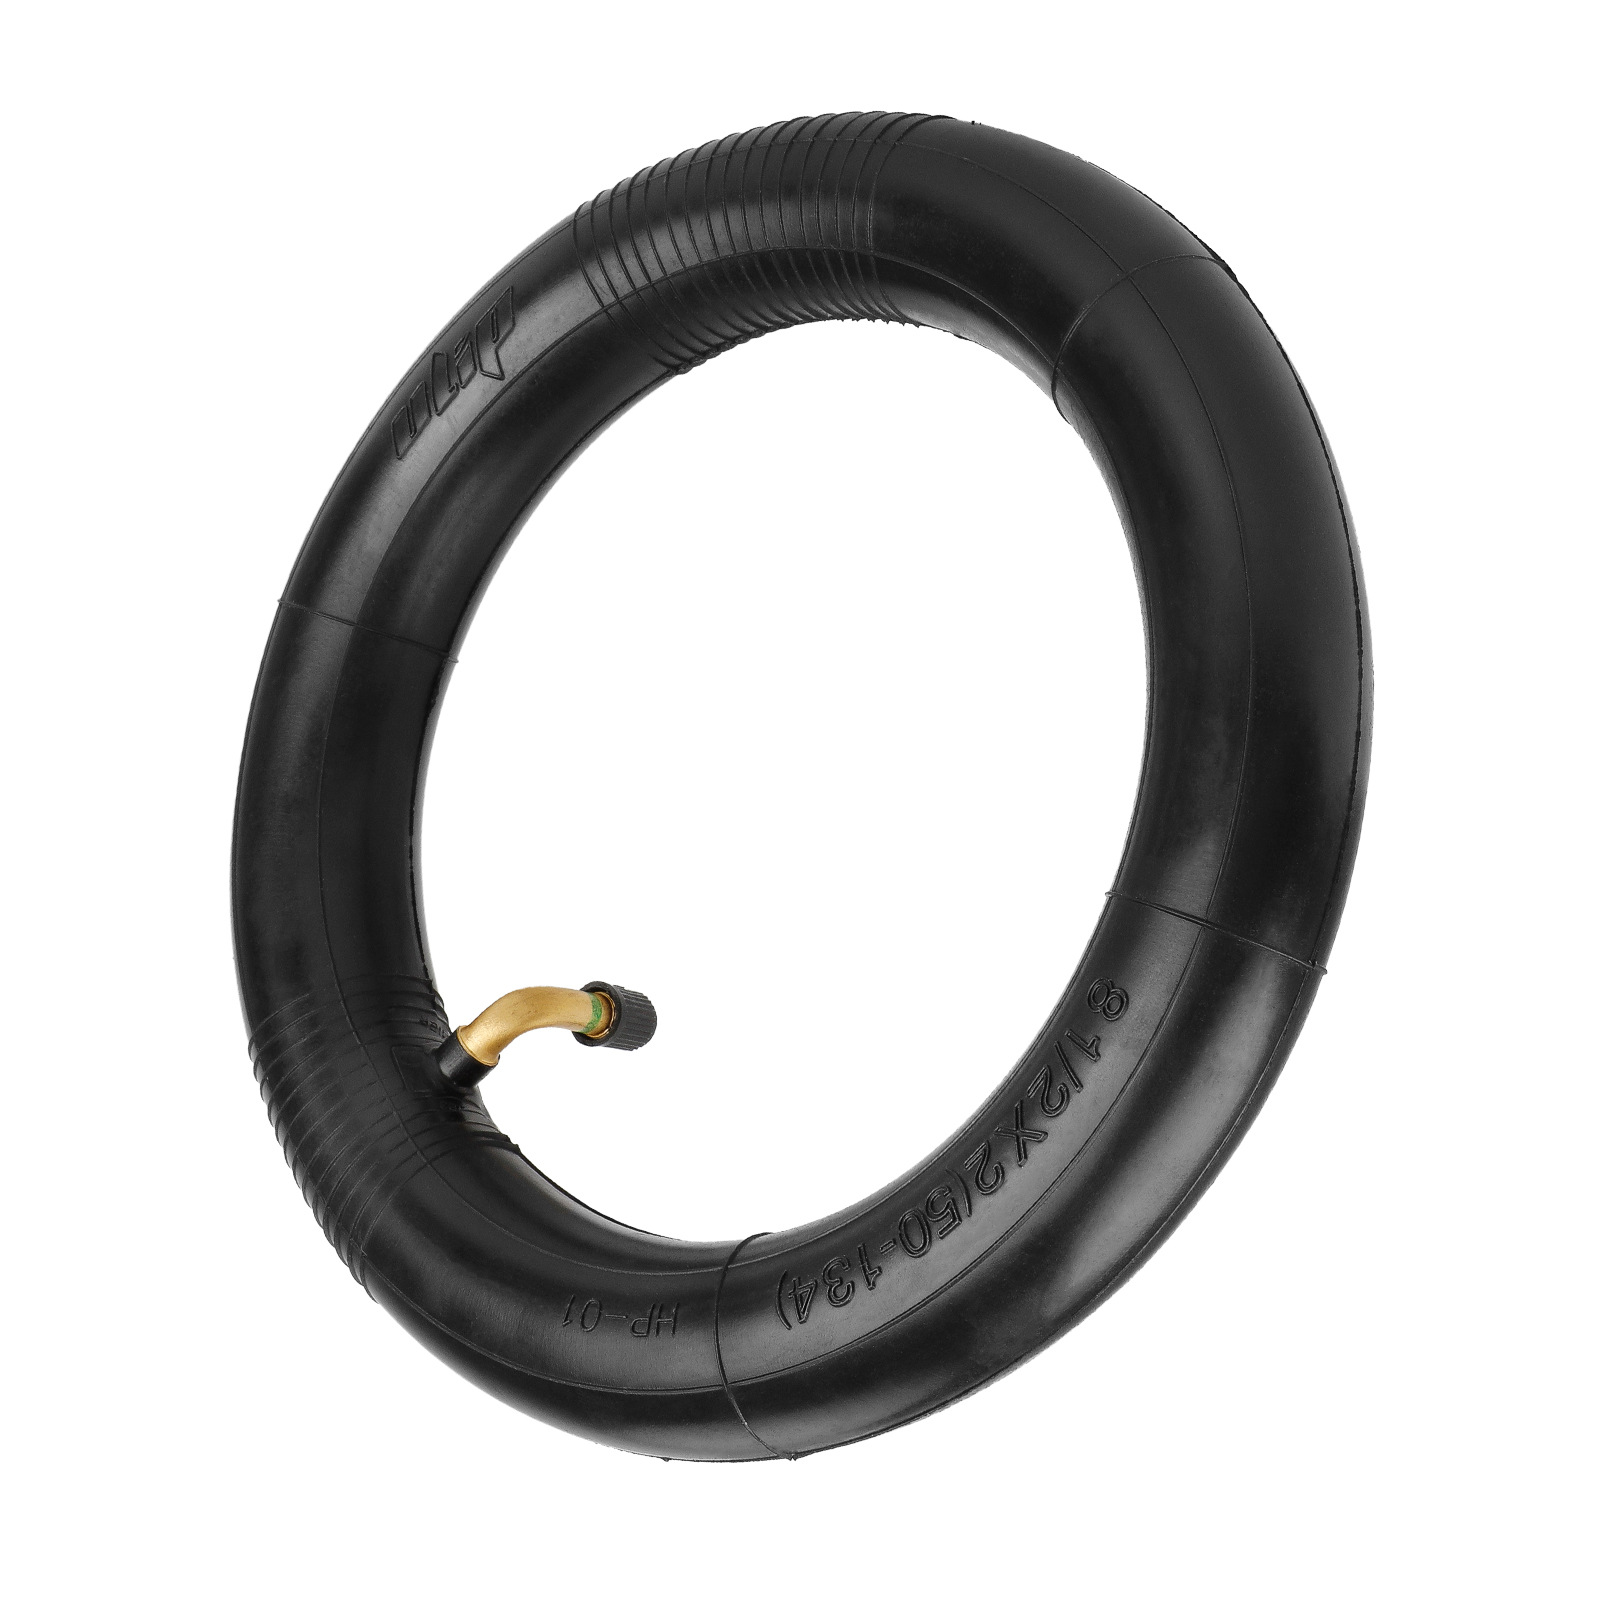 Ulip 8.5x2.0 Tubeless Tire High Quality For Electric Scooter Zero 9 8.5 Inch 8 1/2x2.0 Pneumatic Inner/Outer Tyre